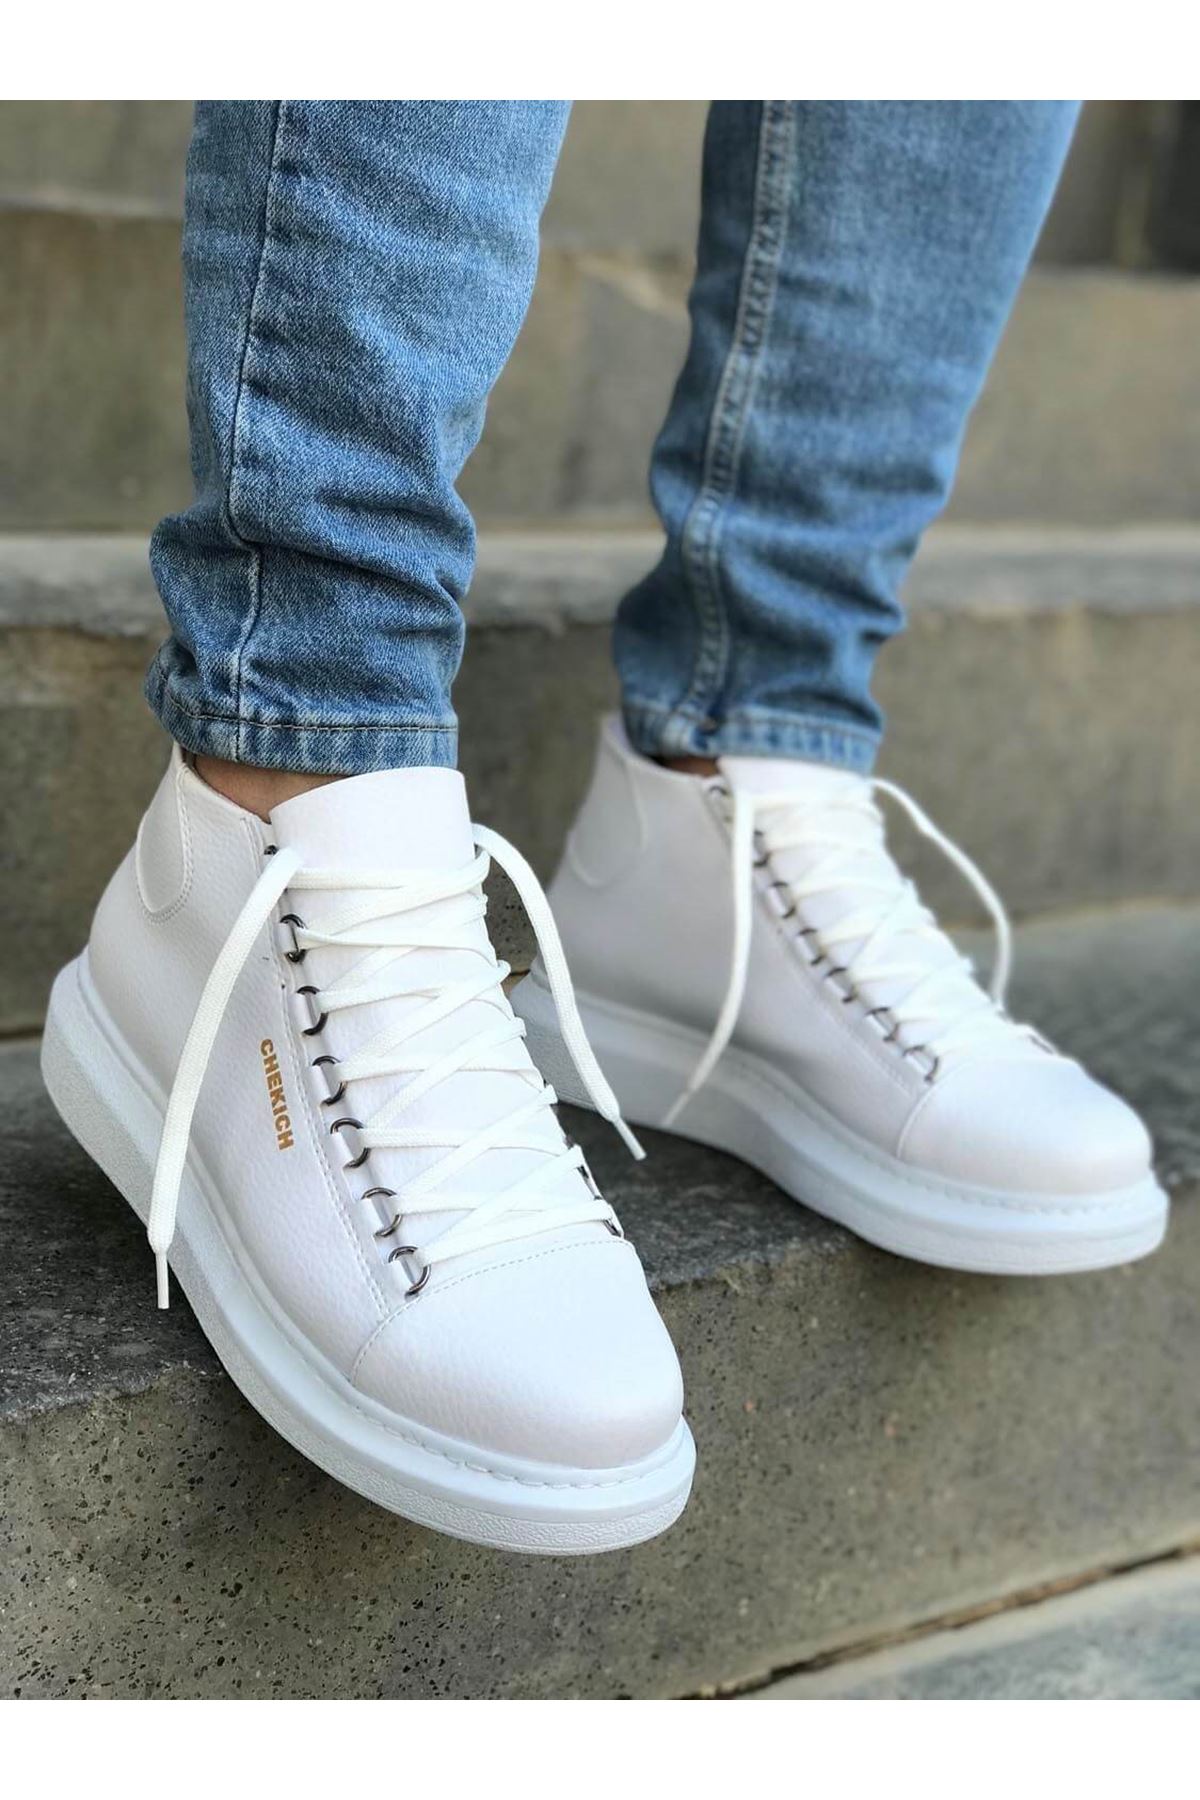 Chekich Men's and Women's Shoes White Non Leather Spring Autumn Seasons Lace Up Unisex Sneakers Comfortable Ankle Gentlemen Fashion Wedding Orthopedic Walking Sport Lightweight Odorless Breathable Warm Boots CH258 V1